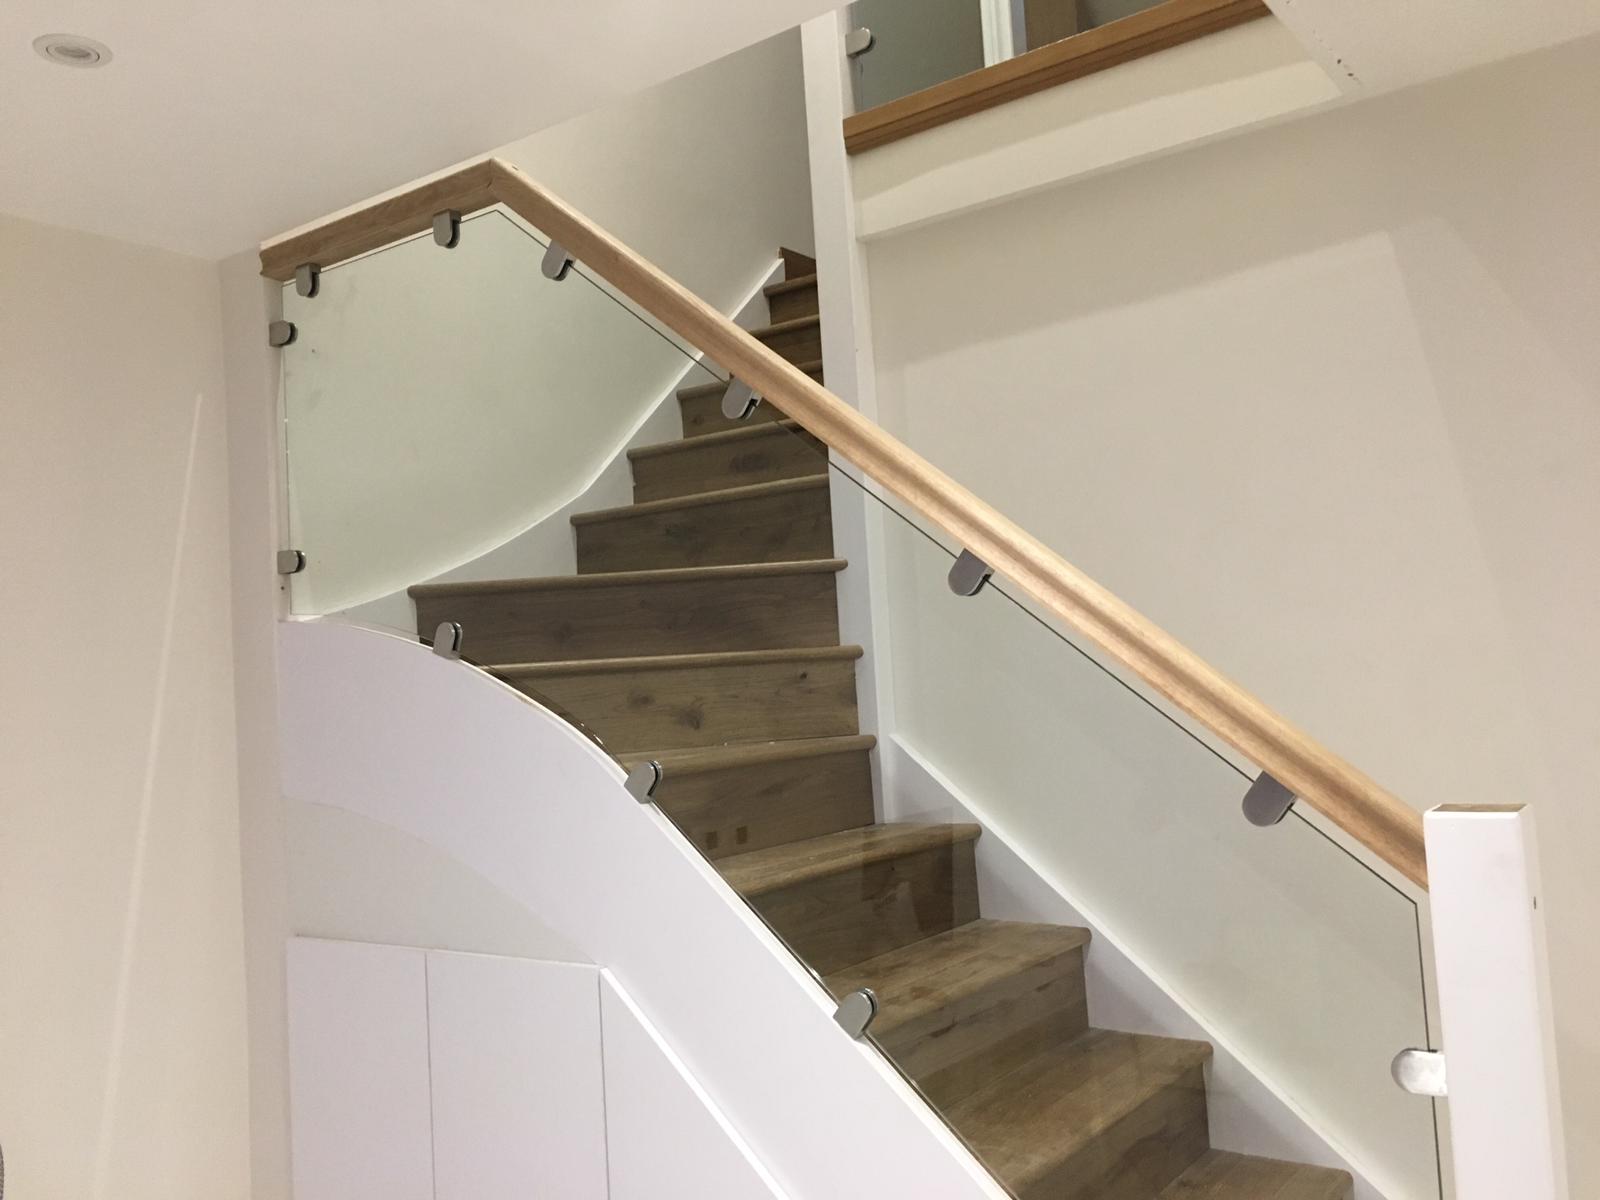 Glass balustrades with wooden handrail